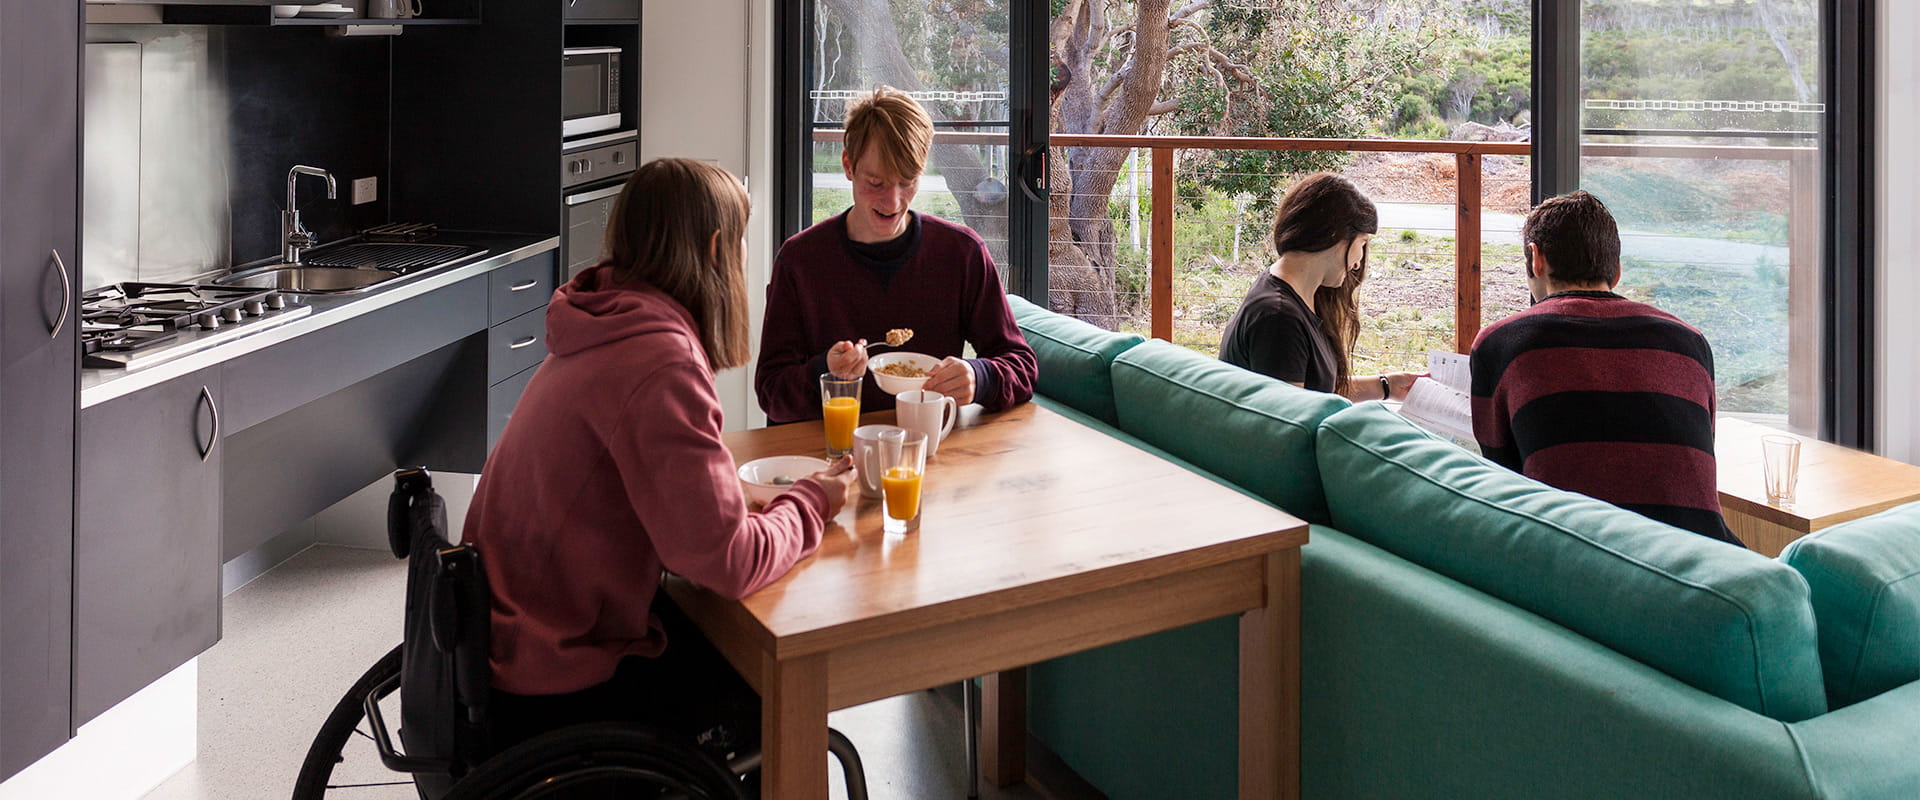 A woman in a wheelchair sits at a wooden table while eating breakfast and talking with a man, while another man and woman sit on a green couch in the background looking at printed information.